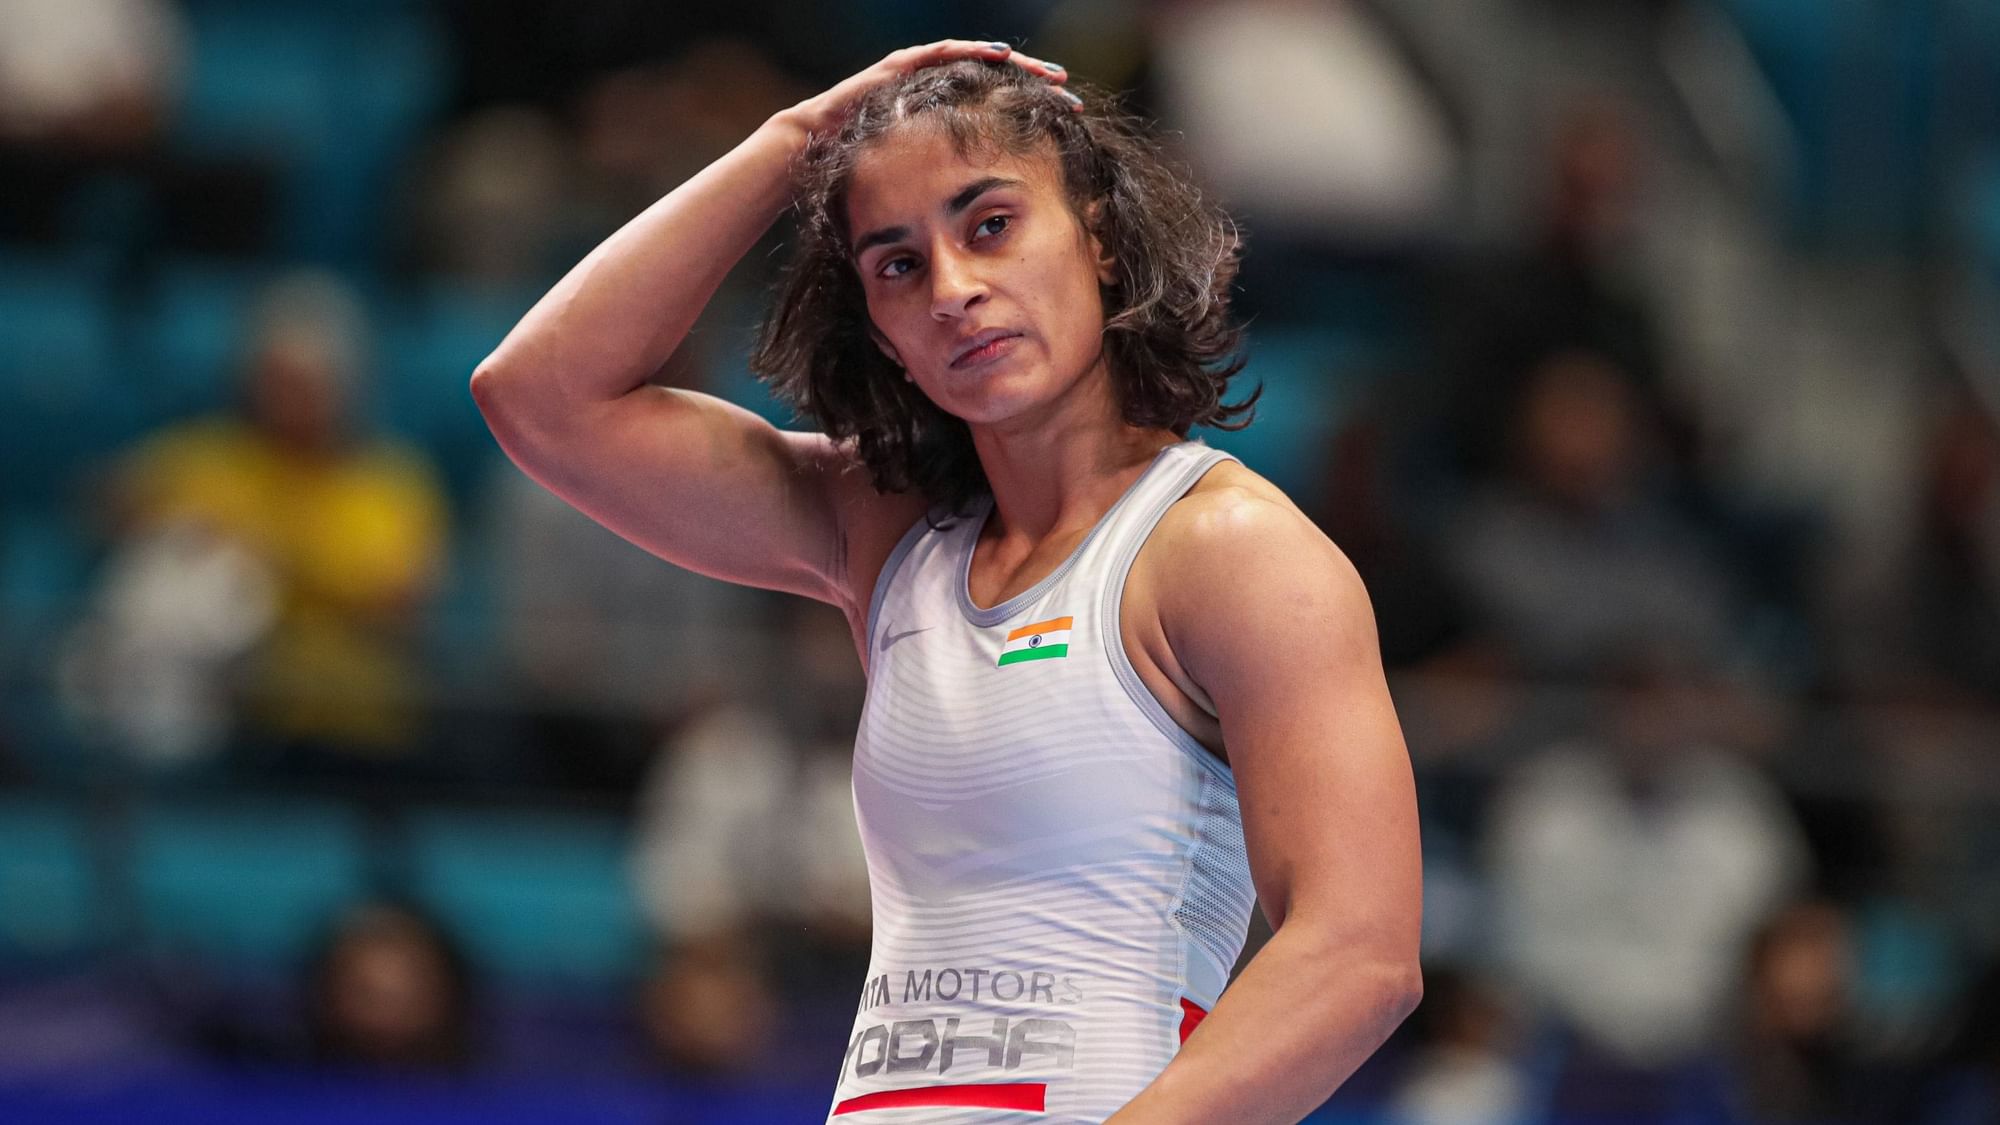 Star Indian grappler Vinesh Phogat has said 2019 was a year filled with all kinds of emotions wherein she learned a lot and believes that 2020 - wherein she will be making her second Olympics appearance - will be special.